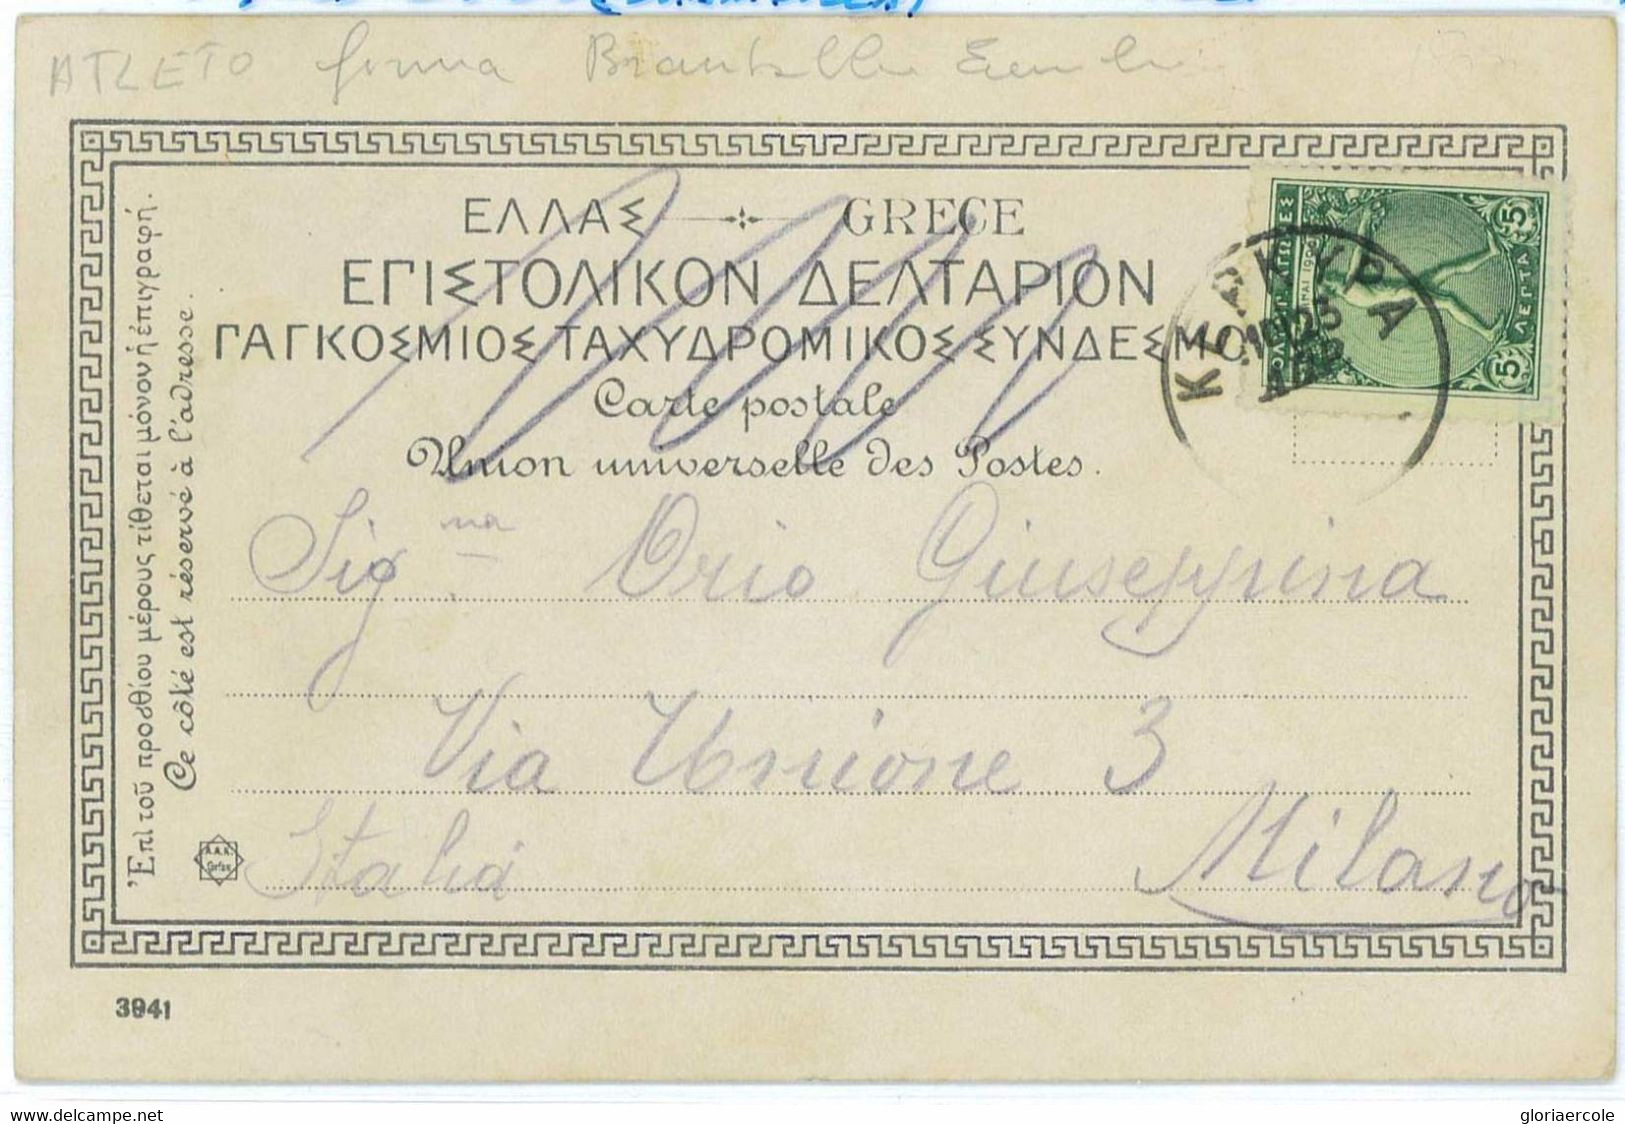 BK1851 - GREECE - POSTAL HISTORY - Olympic Stamp On POSTCARD 1906 Signed By Italian  ATHLETE:  EMILIO BRAMBILLA - Sommer 1896: Athen